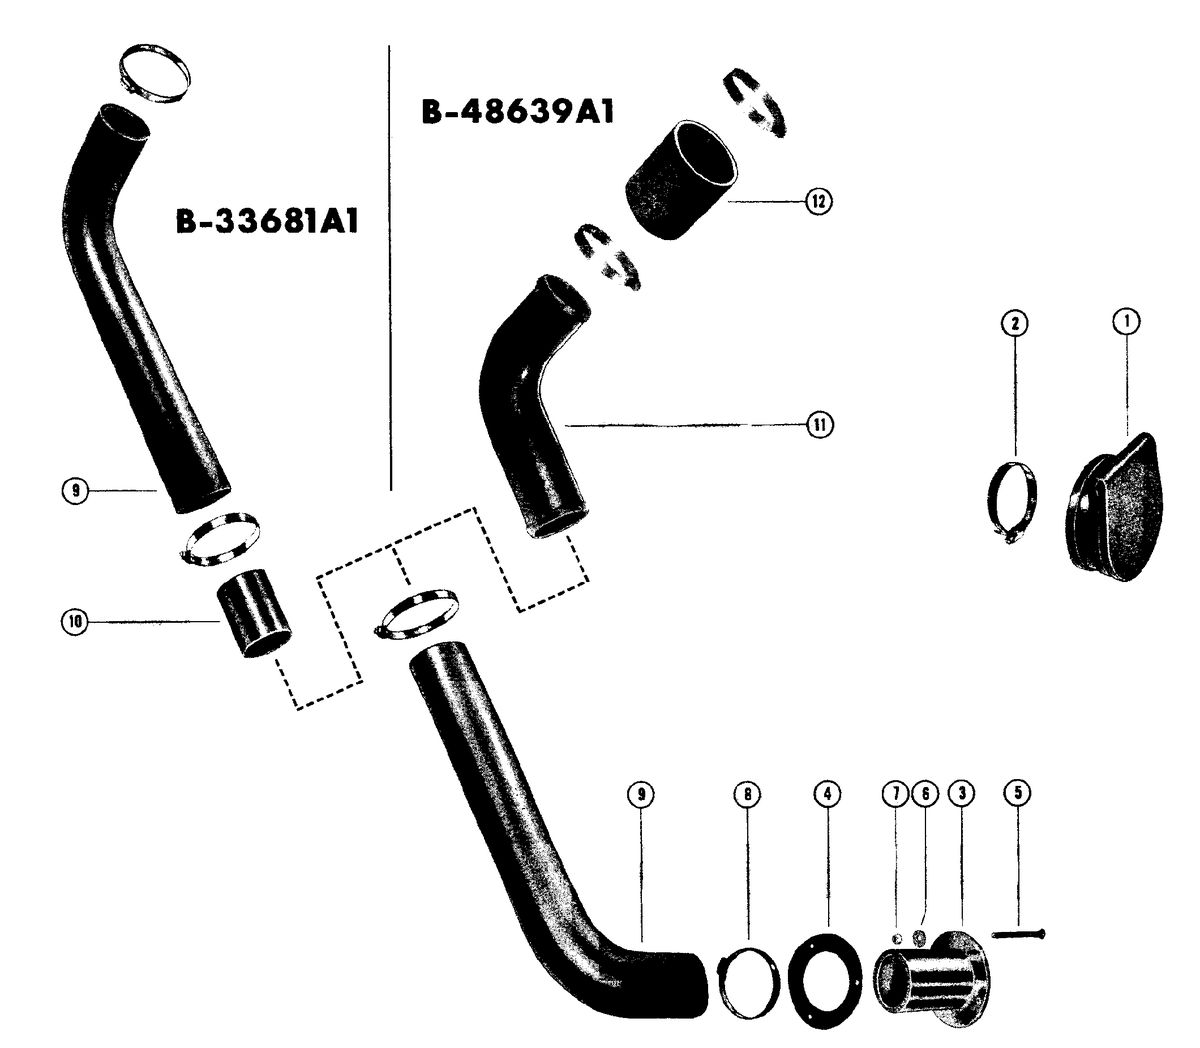 MERCRUISER 225 ENGINE (STERN DRIVE AND INBOARD) EXHAUST KIT